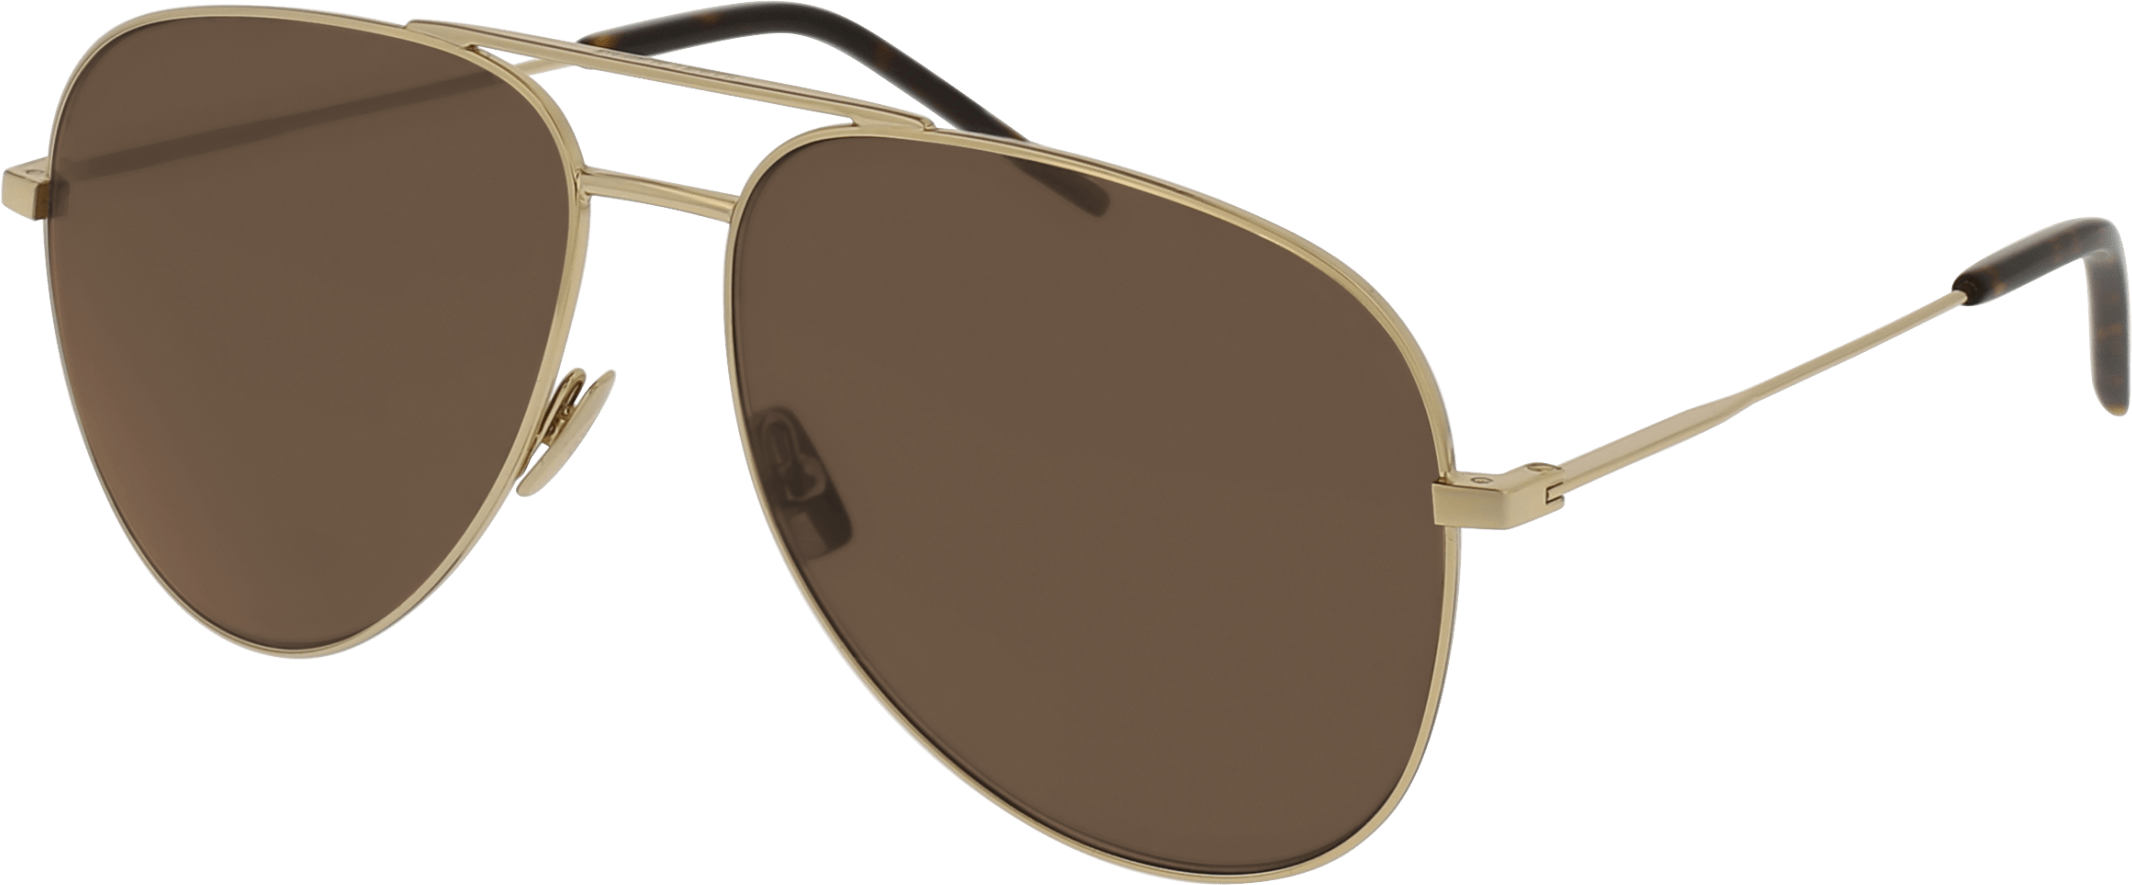 Color_CLASSIC 11-021 - GOLD - BROWN - POLARIZED